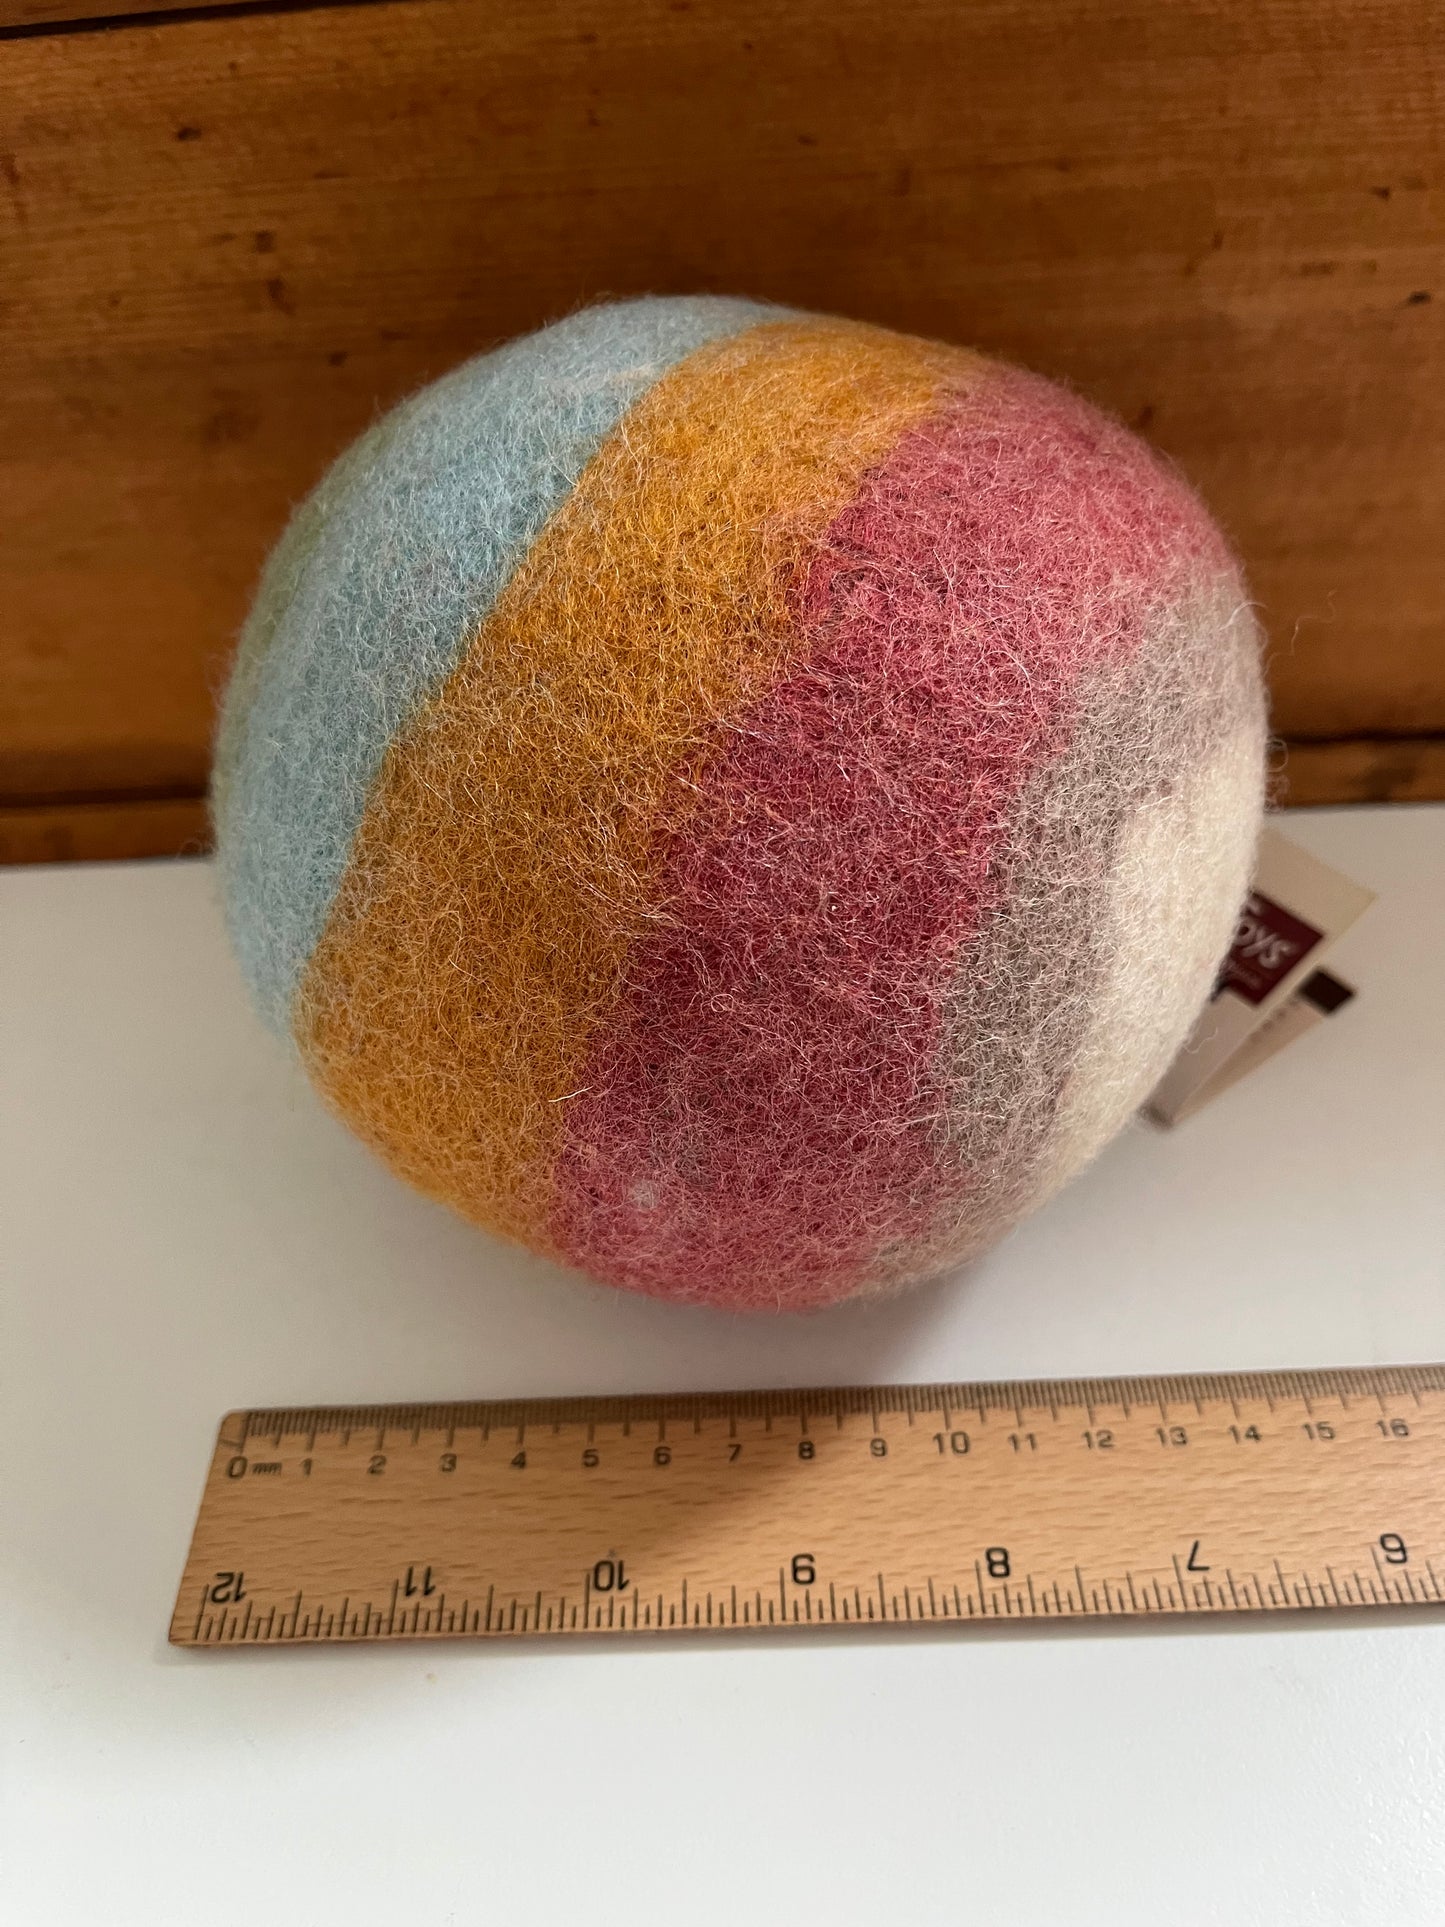 Soft Felted Toy - LARGE EARTH BALL!!…Soccer inside 😊